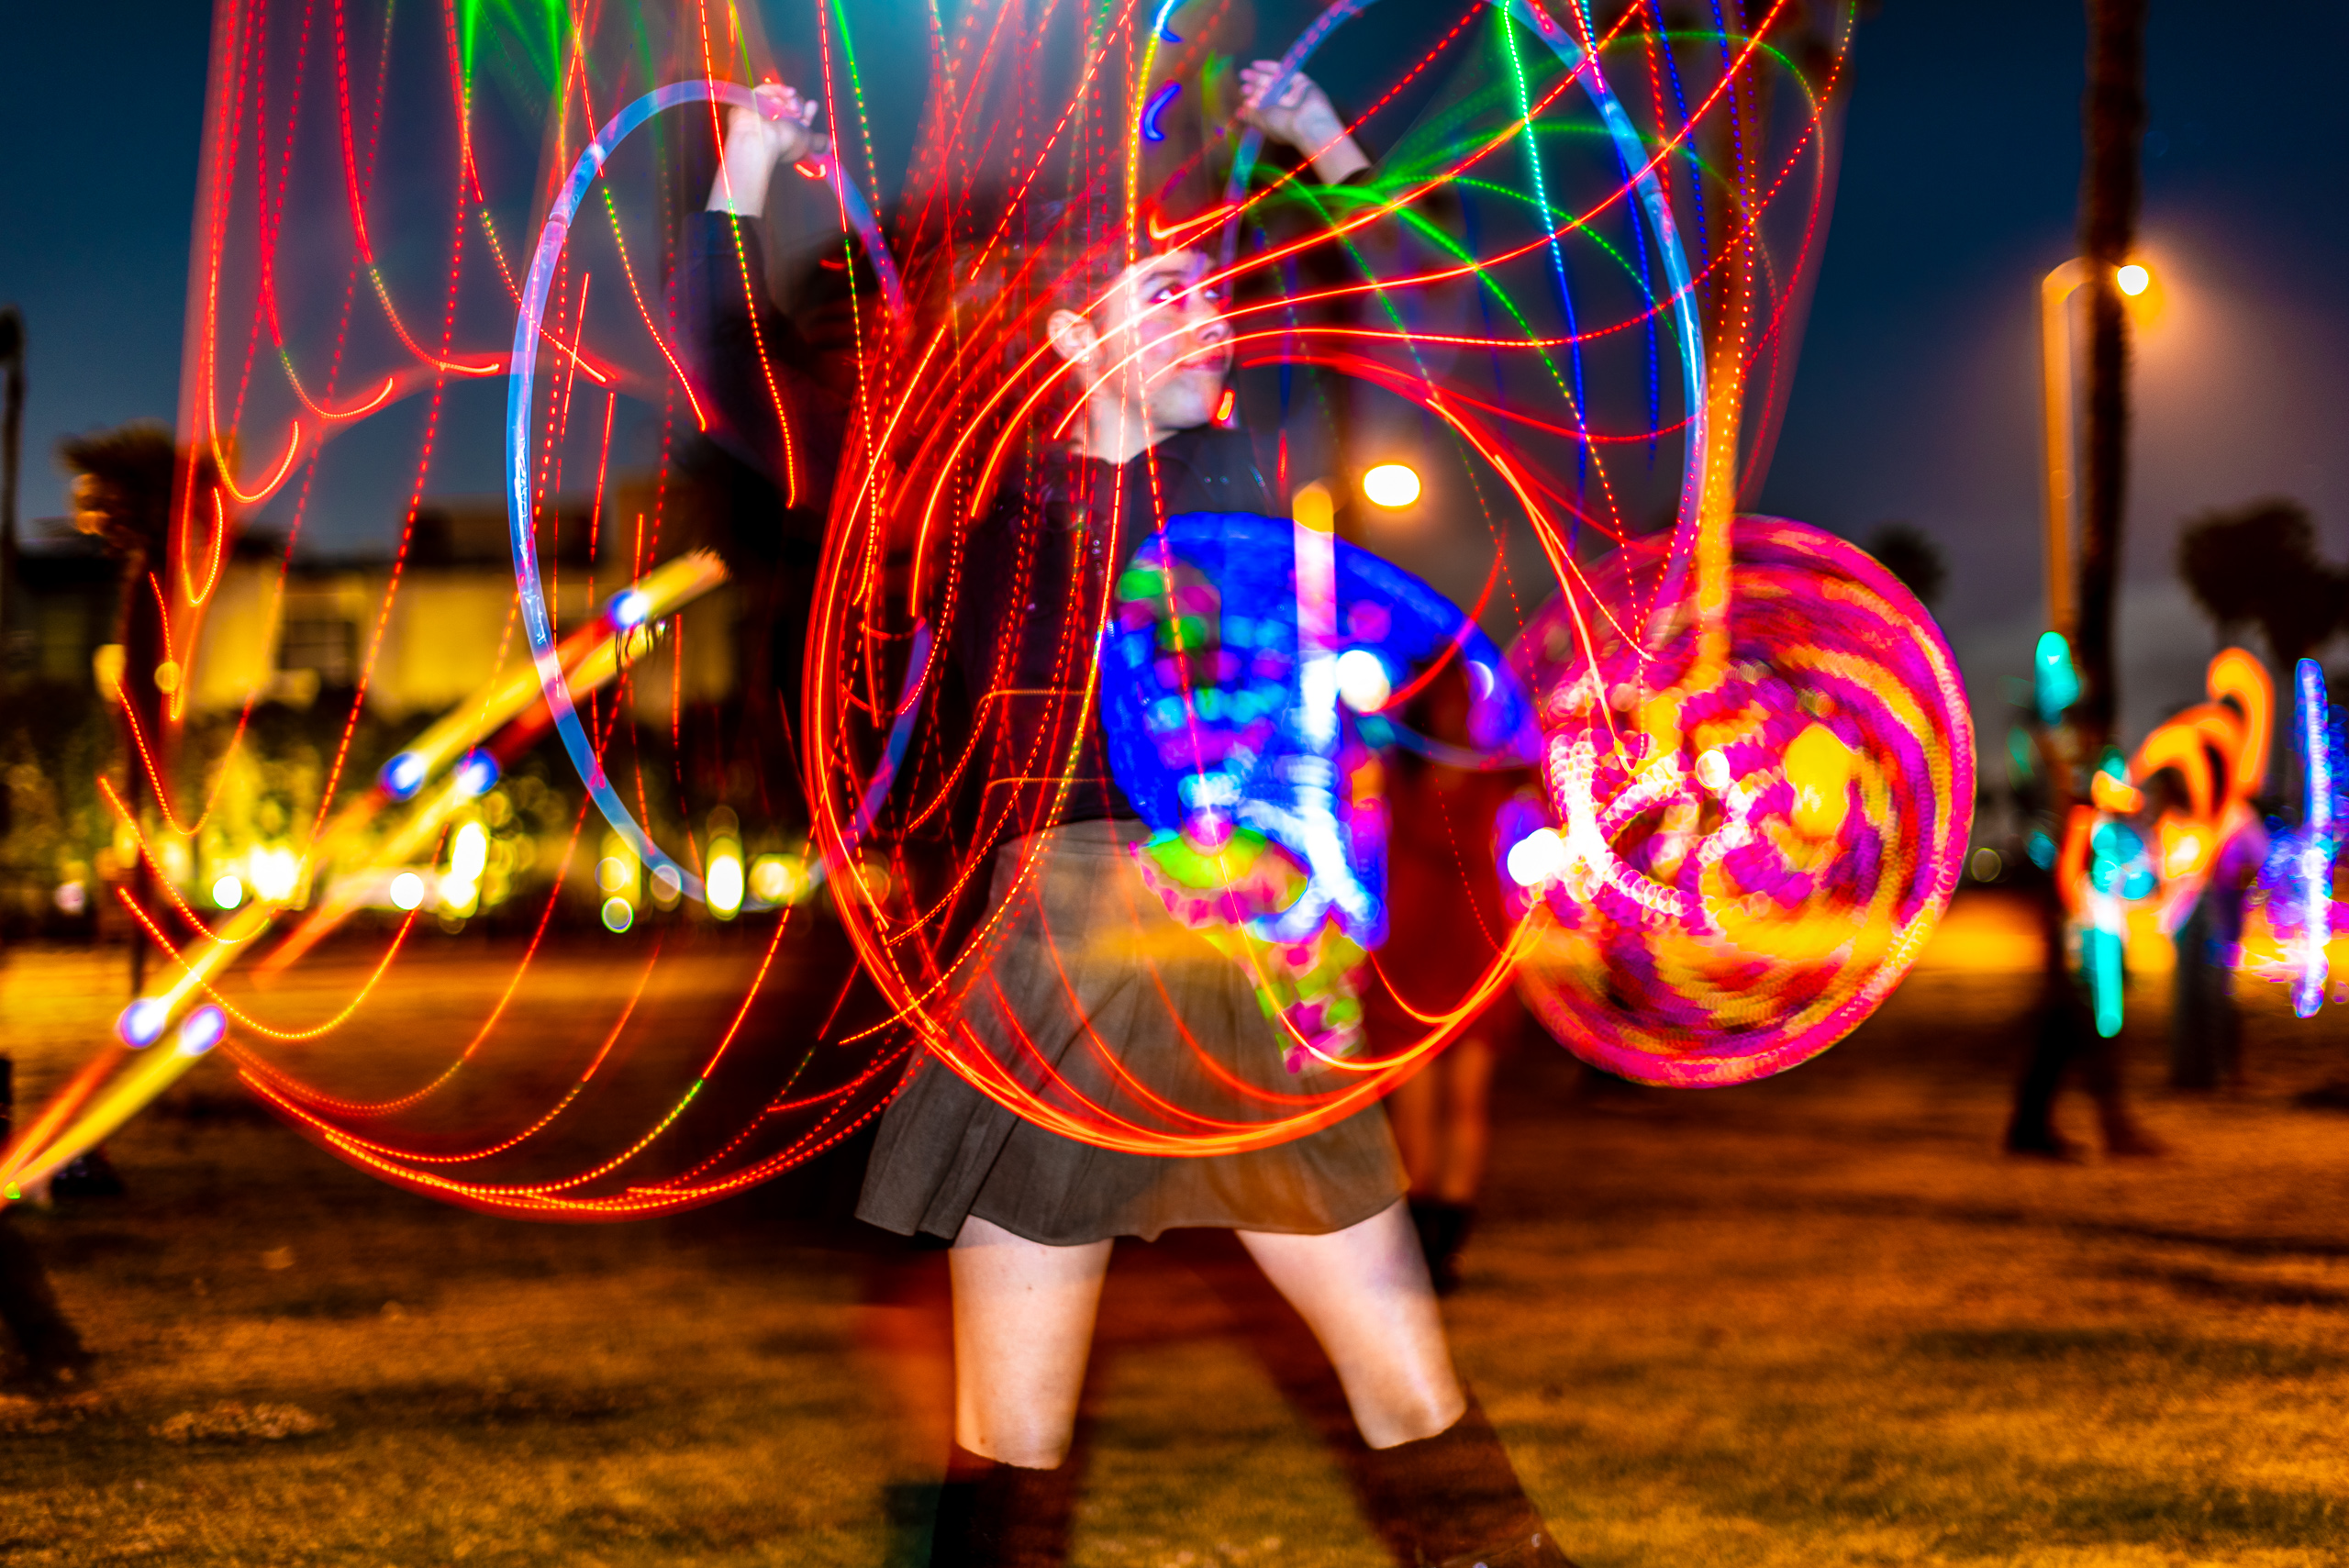 Sabrina Rodriguez, Sabrina “the Hoopist” Rodaisin, performing with an LED Hula Hoop at Venice Glow Flow's Wednesday night jam/class in the park in Venice Beach, CA